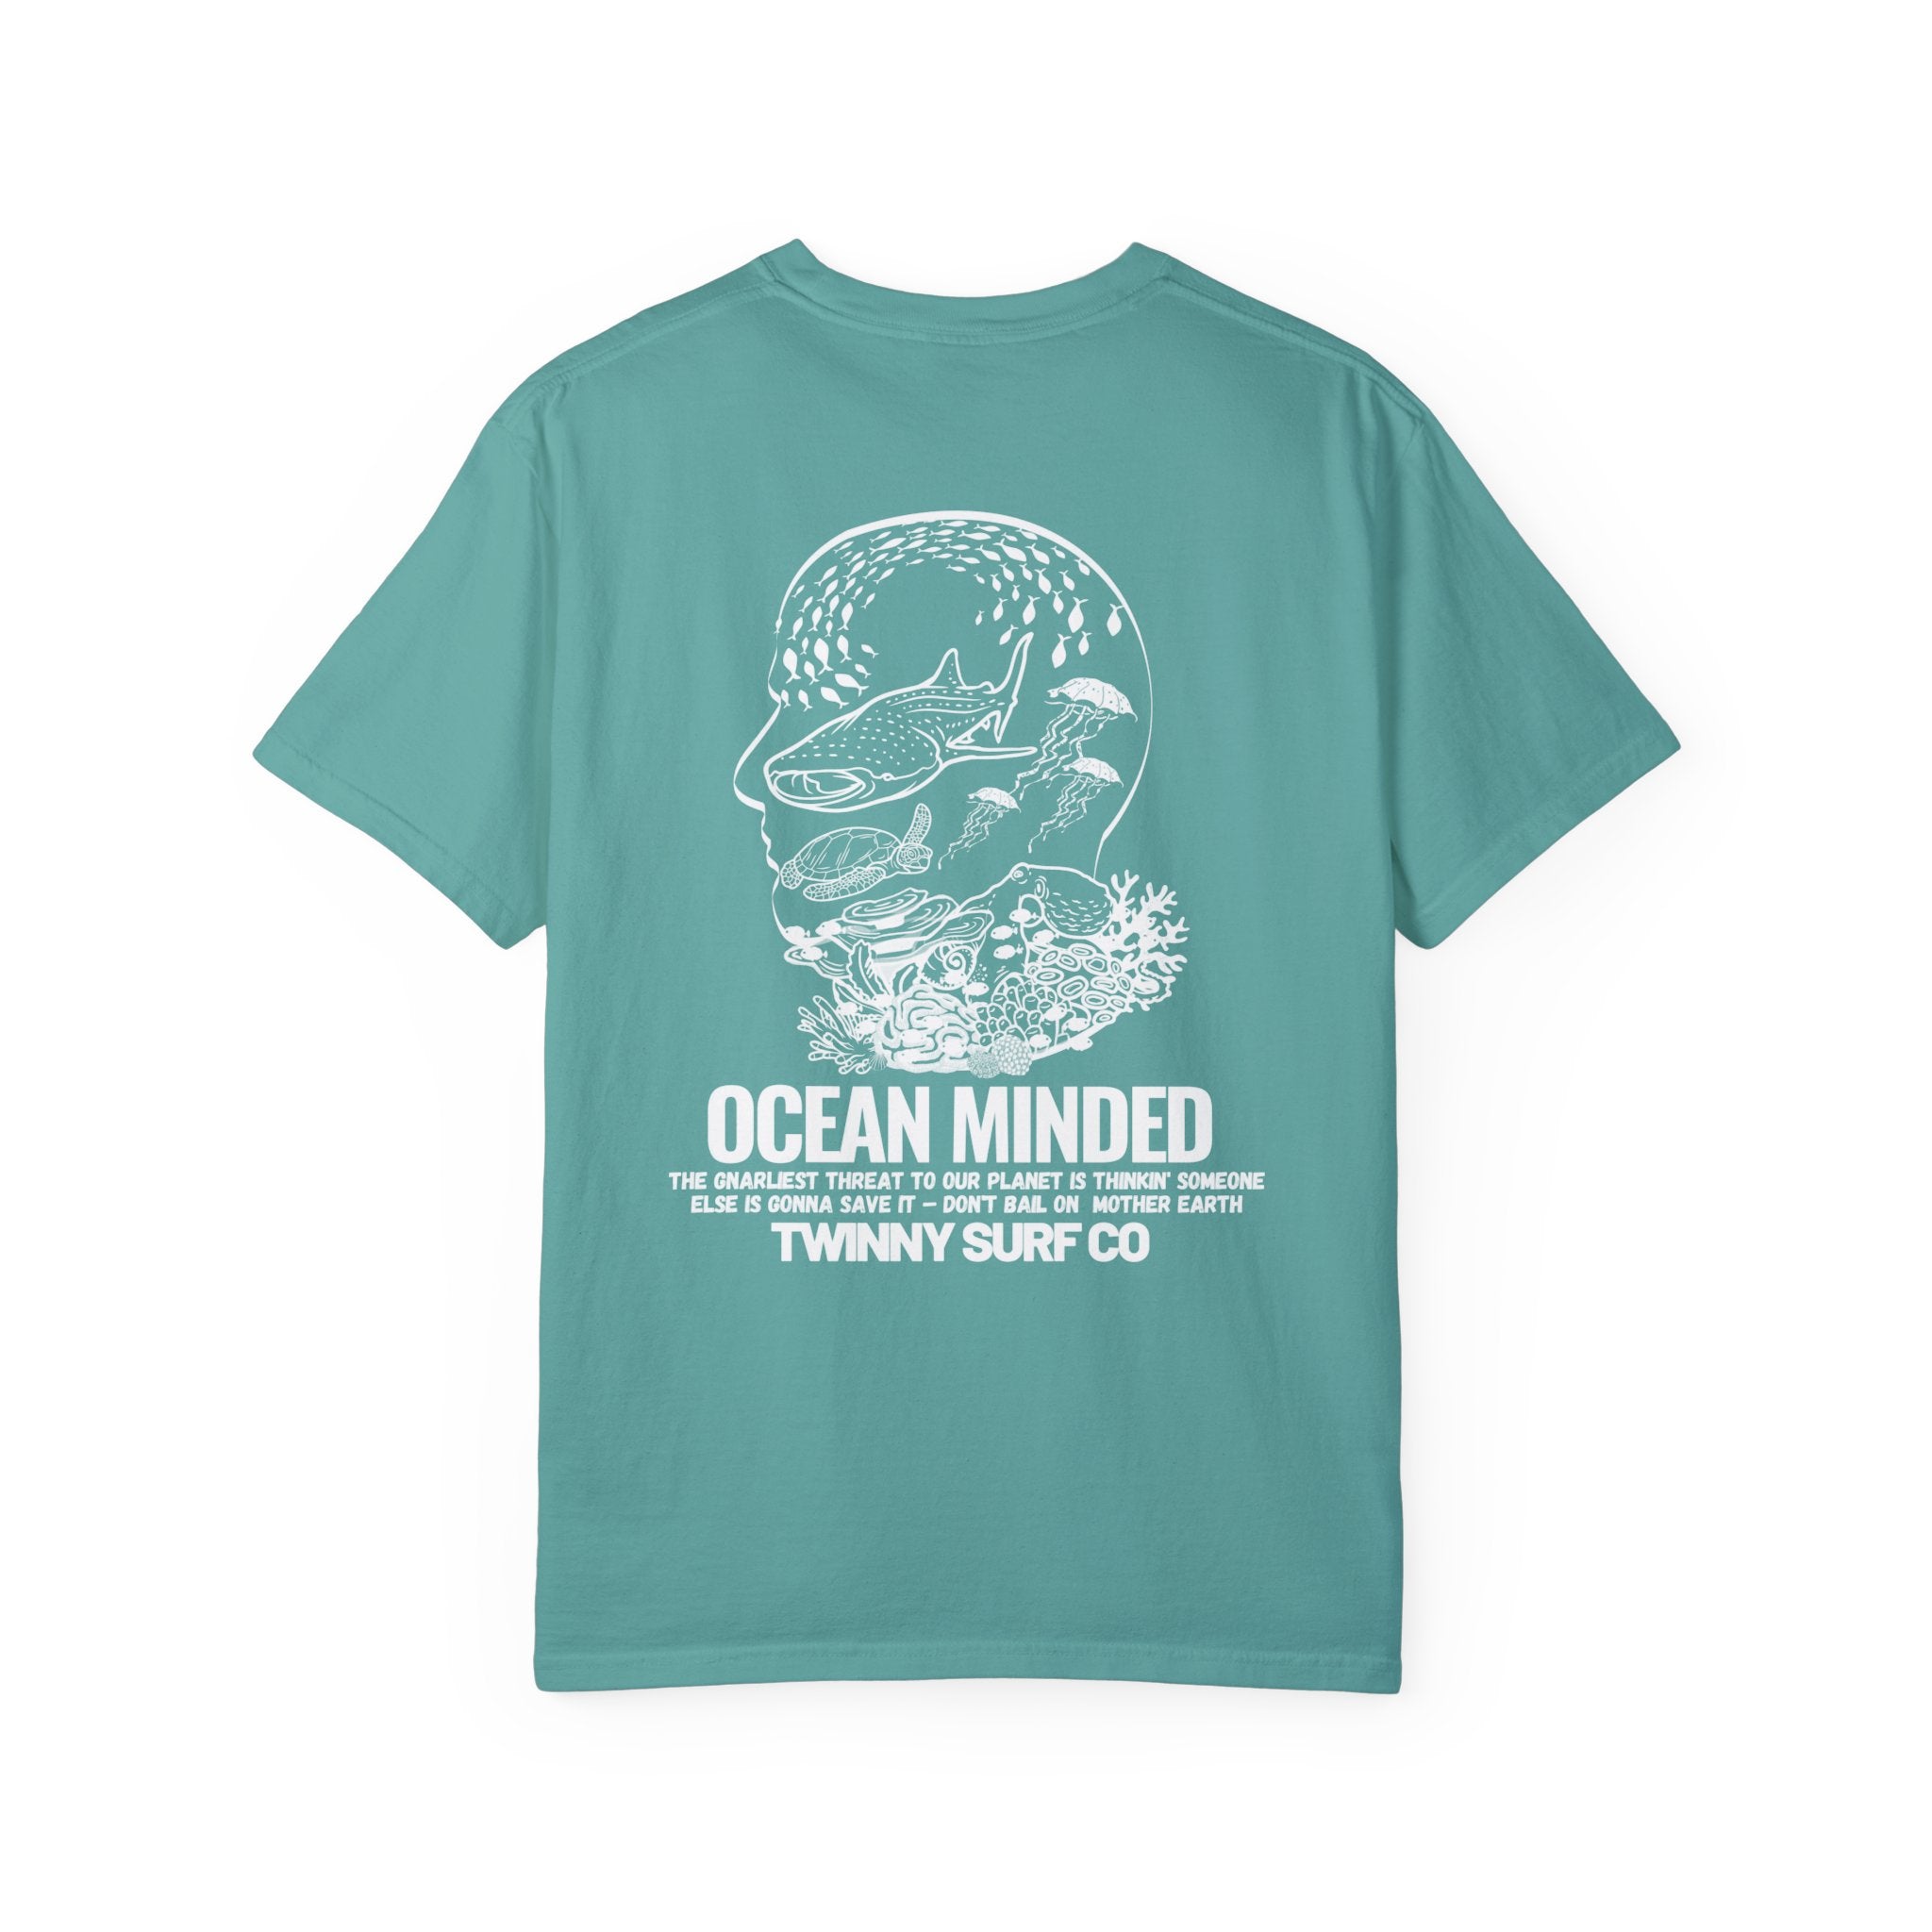 Live Ocean Minded Garment Dyed Tee White Print